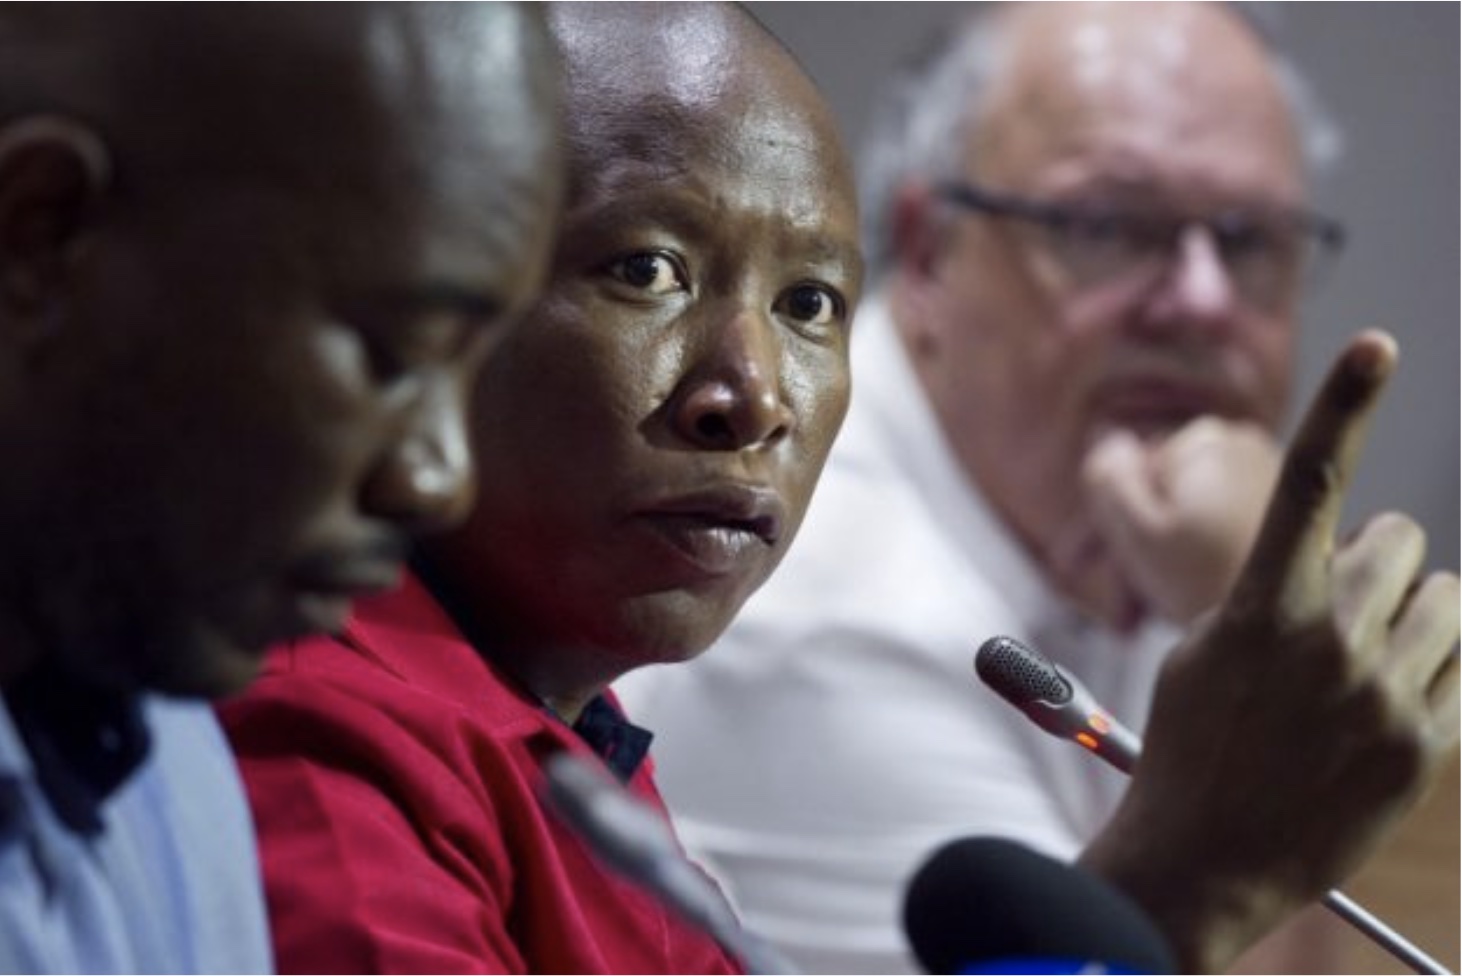 Economic Freedom Fighters (EFF) party leader Julius Malema (2nd L) speaks flanked by Democratic Alliance (DA) party leader Mmusi Maimane (L), and Corne Mulder (R) of the Freedom Front Plus (FF+), as they give a press conference. / AFP PHOTO / RODGER BOSCH